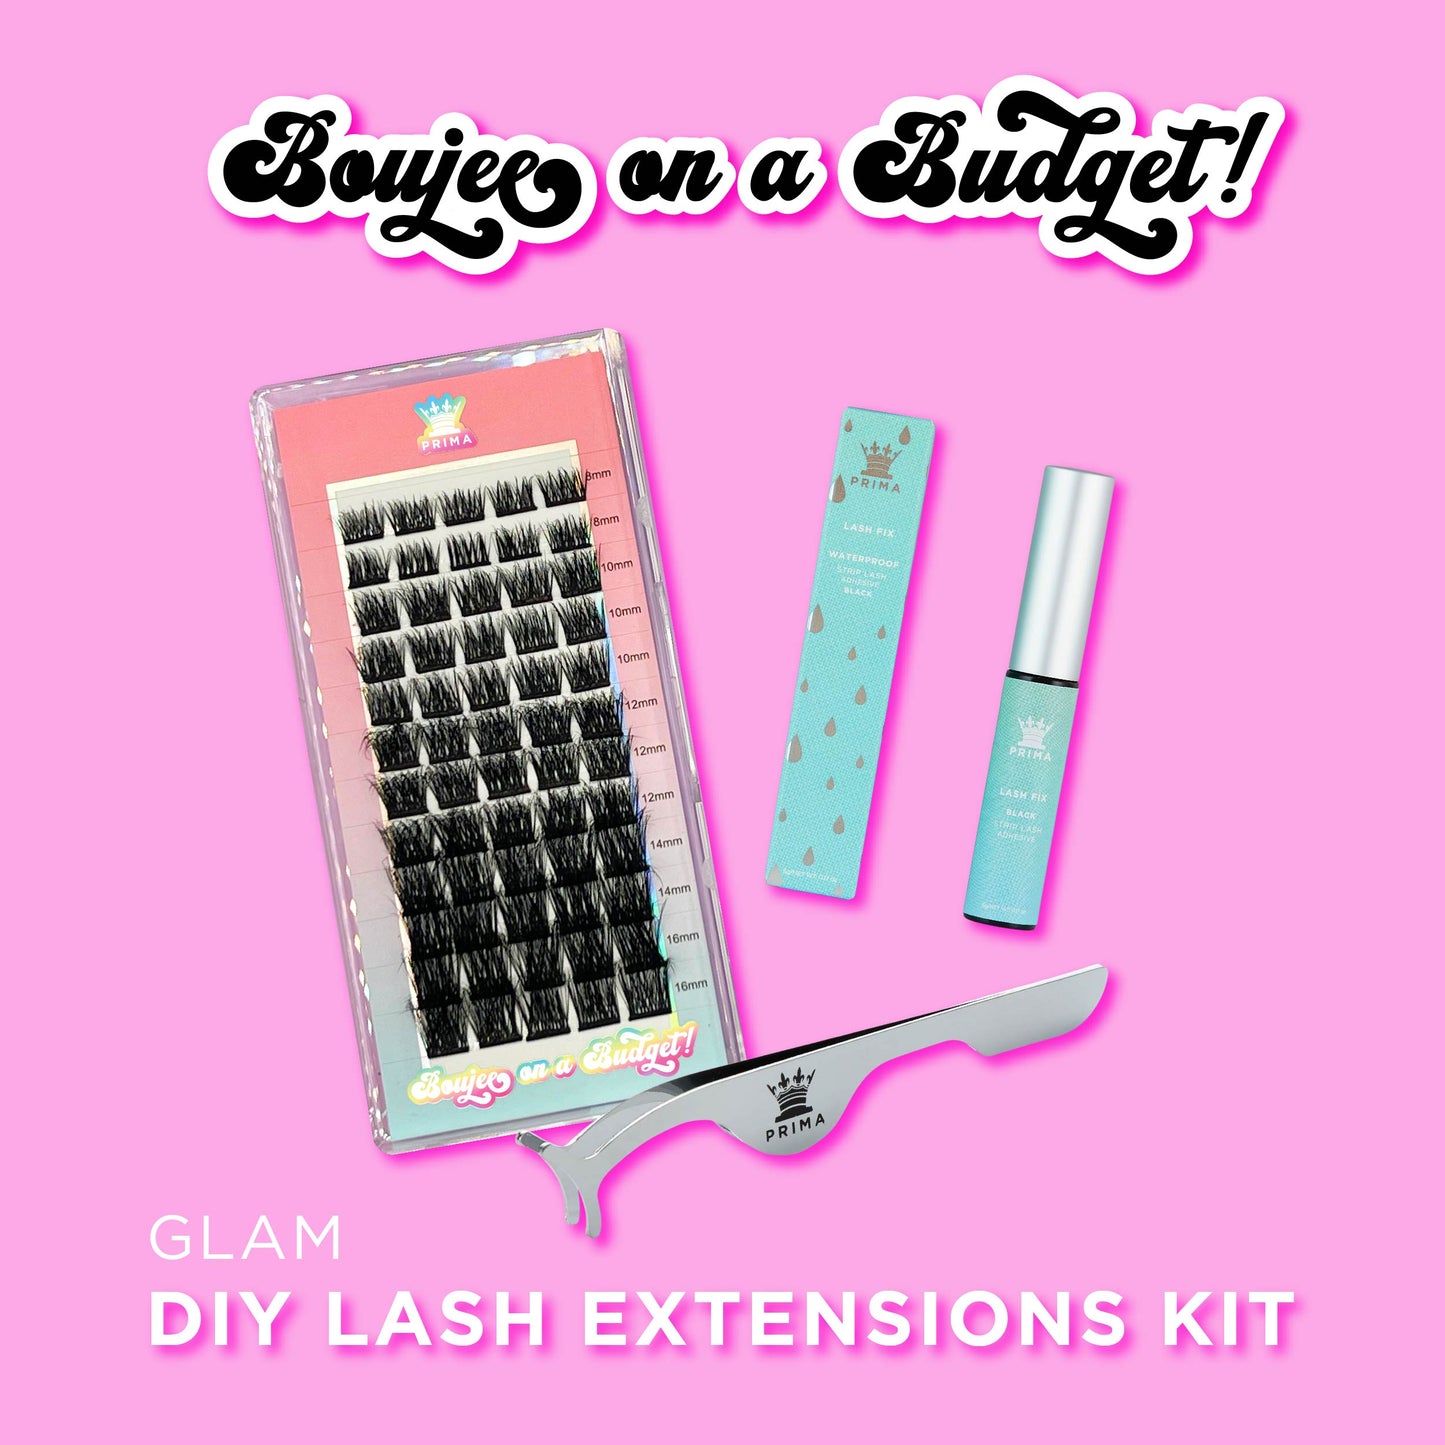 Boujee On a Budget (DIY Lash Extension Kit)